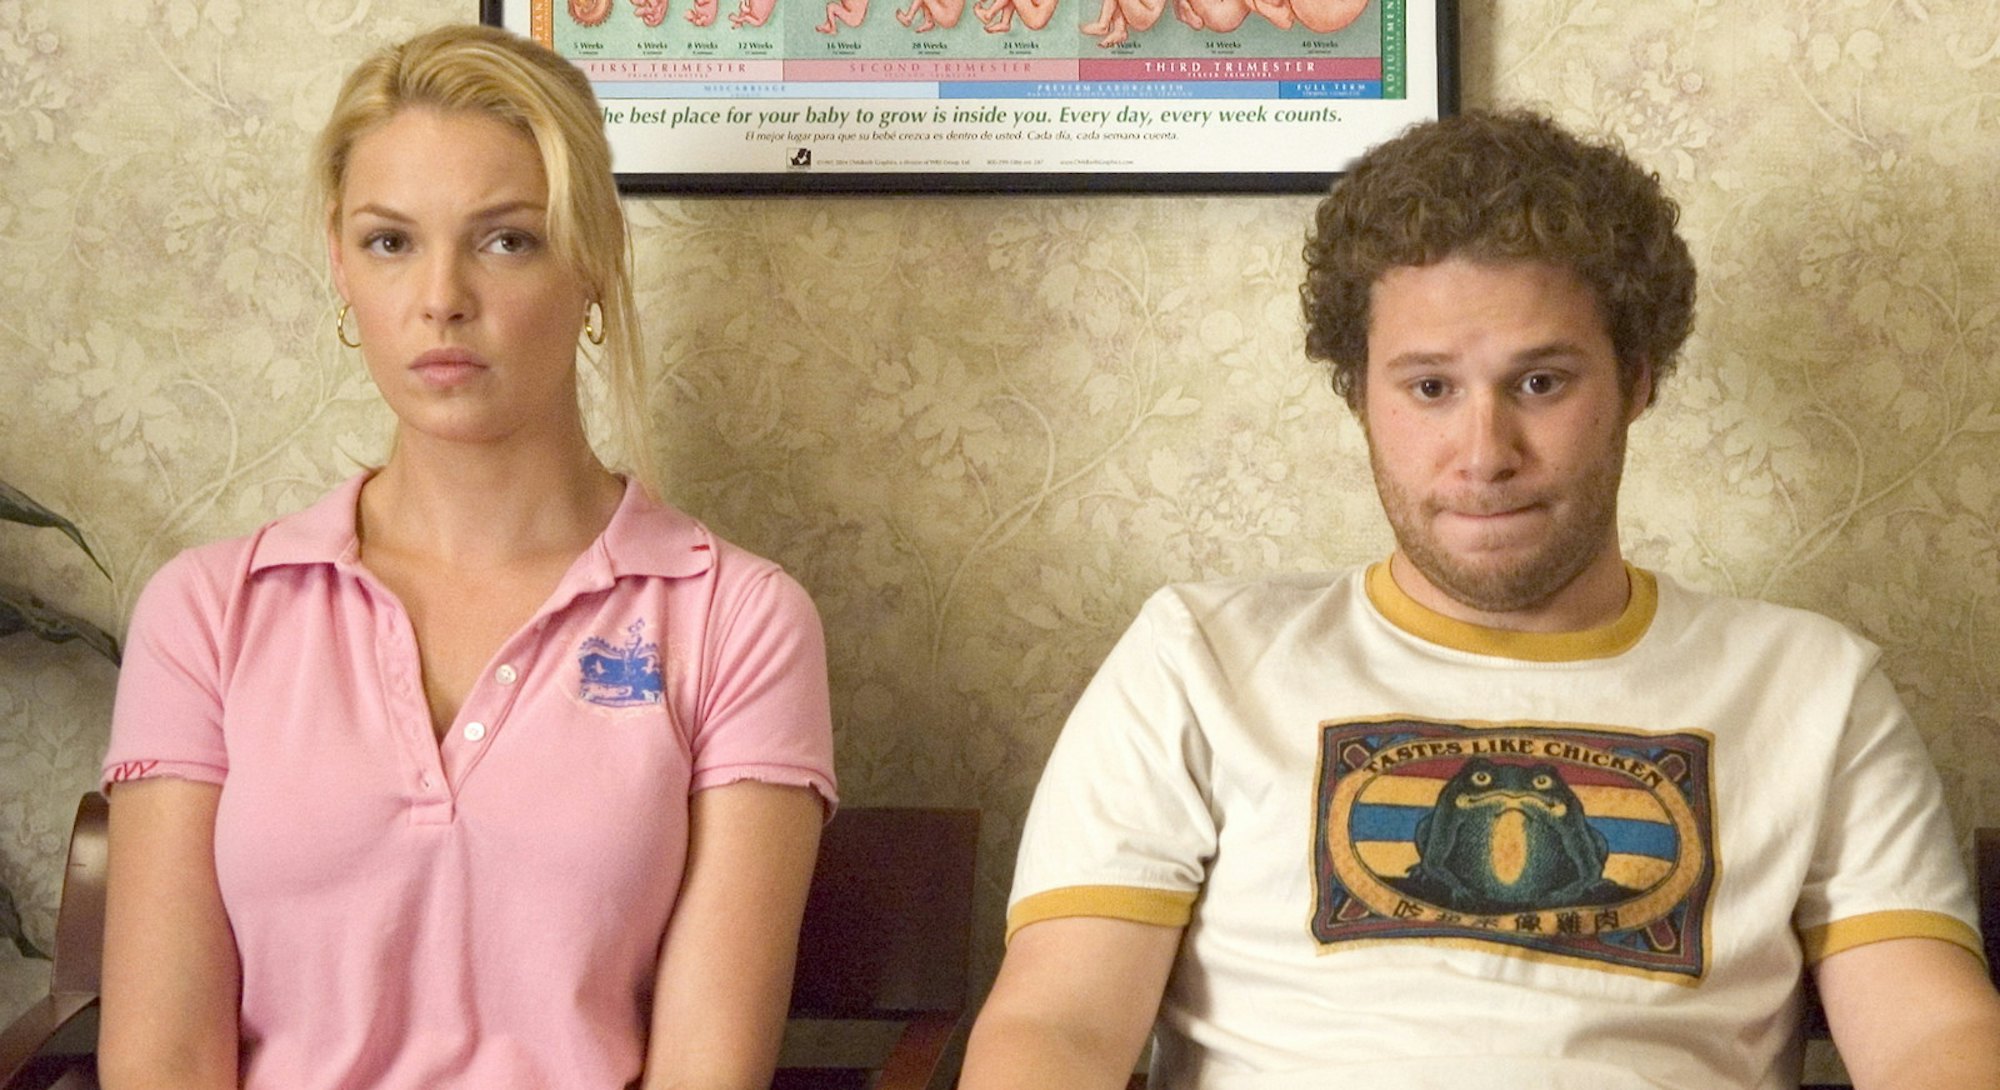 Seth Rogan unexpectedly becomes a father after a one night stand in "Knocked Up."